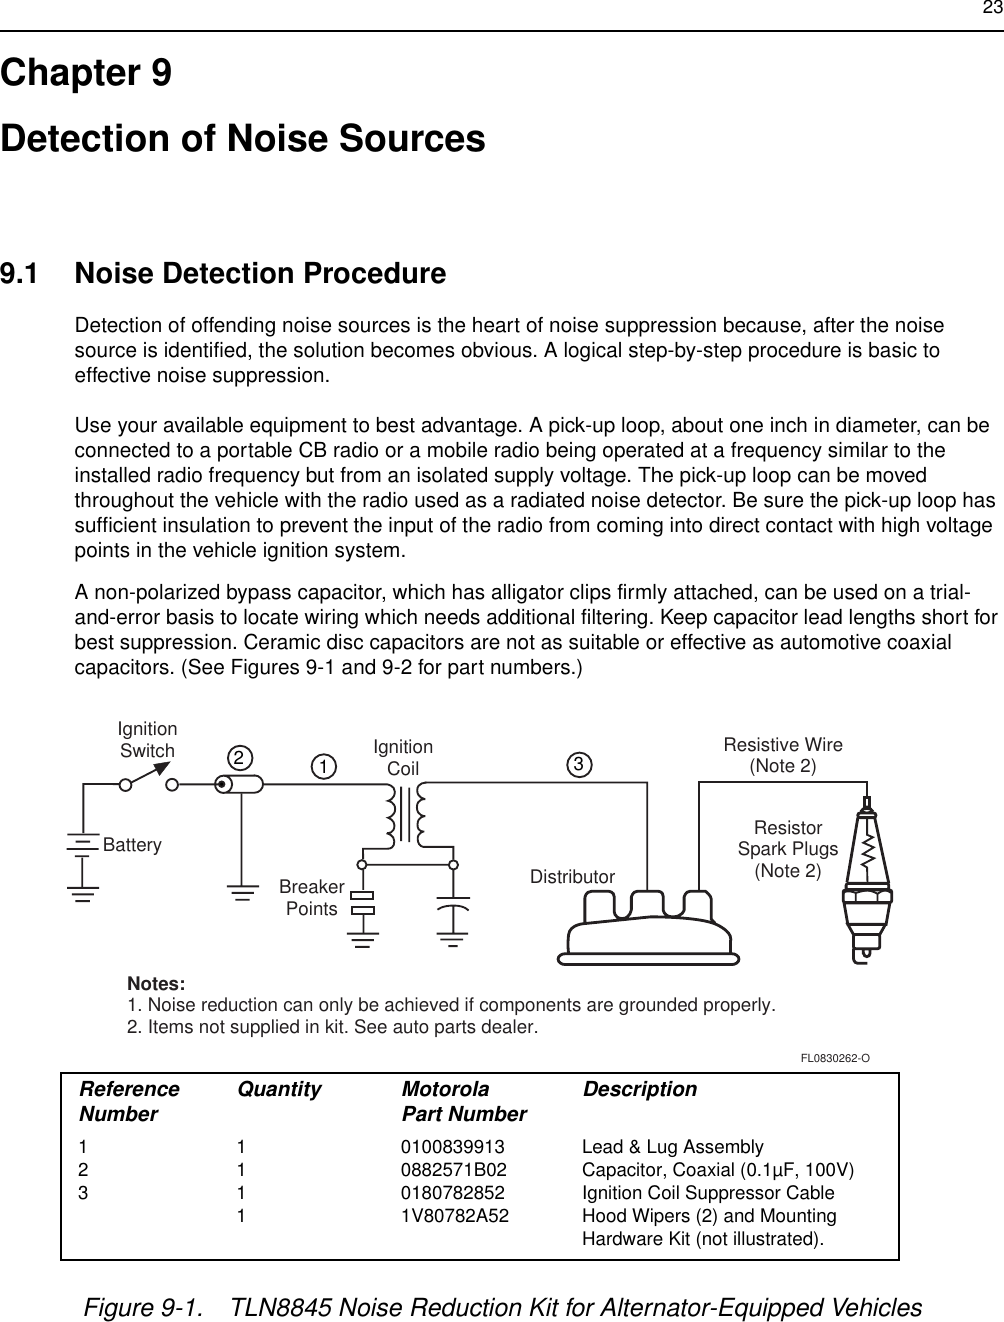 23Chapter 9Detection of Noise Sources9.1 Noise Detection ProcedureDetection of offending noise sources is the heart of noise suppression because, after the noise source is identified, the solution becomes obvious. A logical step-by-step procedure is basic to effective noise suppression.Use your available equipment to best advantage. A pick-up loop, about one inch in diameter, can be connected to a portable CB radio or a mobile radio being operated at a frequency similar to the installed radio frequency but from an isolated supply voltage. The pick-up loop can be moved throughout the vehicle with the radio used as a radiated noise detector. Be sure the pick-up loop has sufficient insulation to prevent the input of the radio from coming into direct contact with high voltage points in the vehicle ignition system.A non-polarized bypass capacitor, which has alligator clips firmly attached, can be used on a trial-and-error basis to locate wiring which needs additional filtering. Keep capacitor lead lengths short for best suppression. Ceramic disc capacitors are not as suitable or effective as automotive coaxial capacitors. (See Figures 9-1 and 9-2 for part numbers.)Figure 9-1. TLN8845 Noise Reduction Kit for Alternator-Equipped VehiclesIgnitionSwitchBatteryIgnitionCoilDistributorBreakerPointsResistive Wire(Note 2)ResistorSpark Plugs(Note 2)Notes:1. Noise reduction can only be achieved if components are grounded properly.2. Items not supplied in kit. See auto parts dealer.123FL0830262-OReference Quantity Motorola DescriptionNumber Part Number1 1 0100839913 Lead &amp; Lug Assembly2 1 0882571B02 Capacitor, Coaxial (0.1µF, 100V)3 1 0180782852 Ignition Coil Suppressor Cable1 1V80782A52 Hood Wipers (2) and Mounting Hardware Kit (not illustrated).